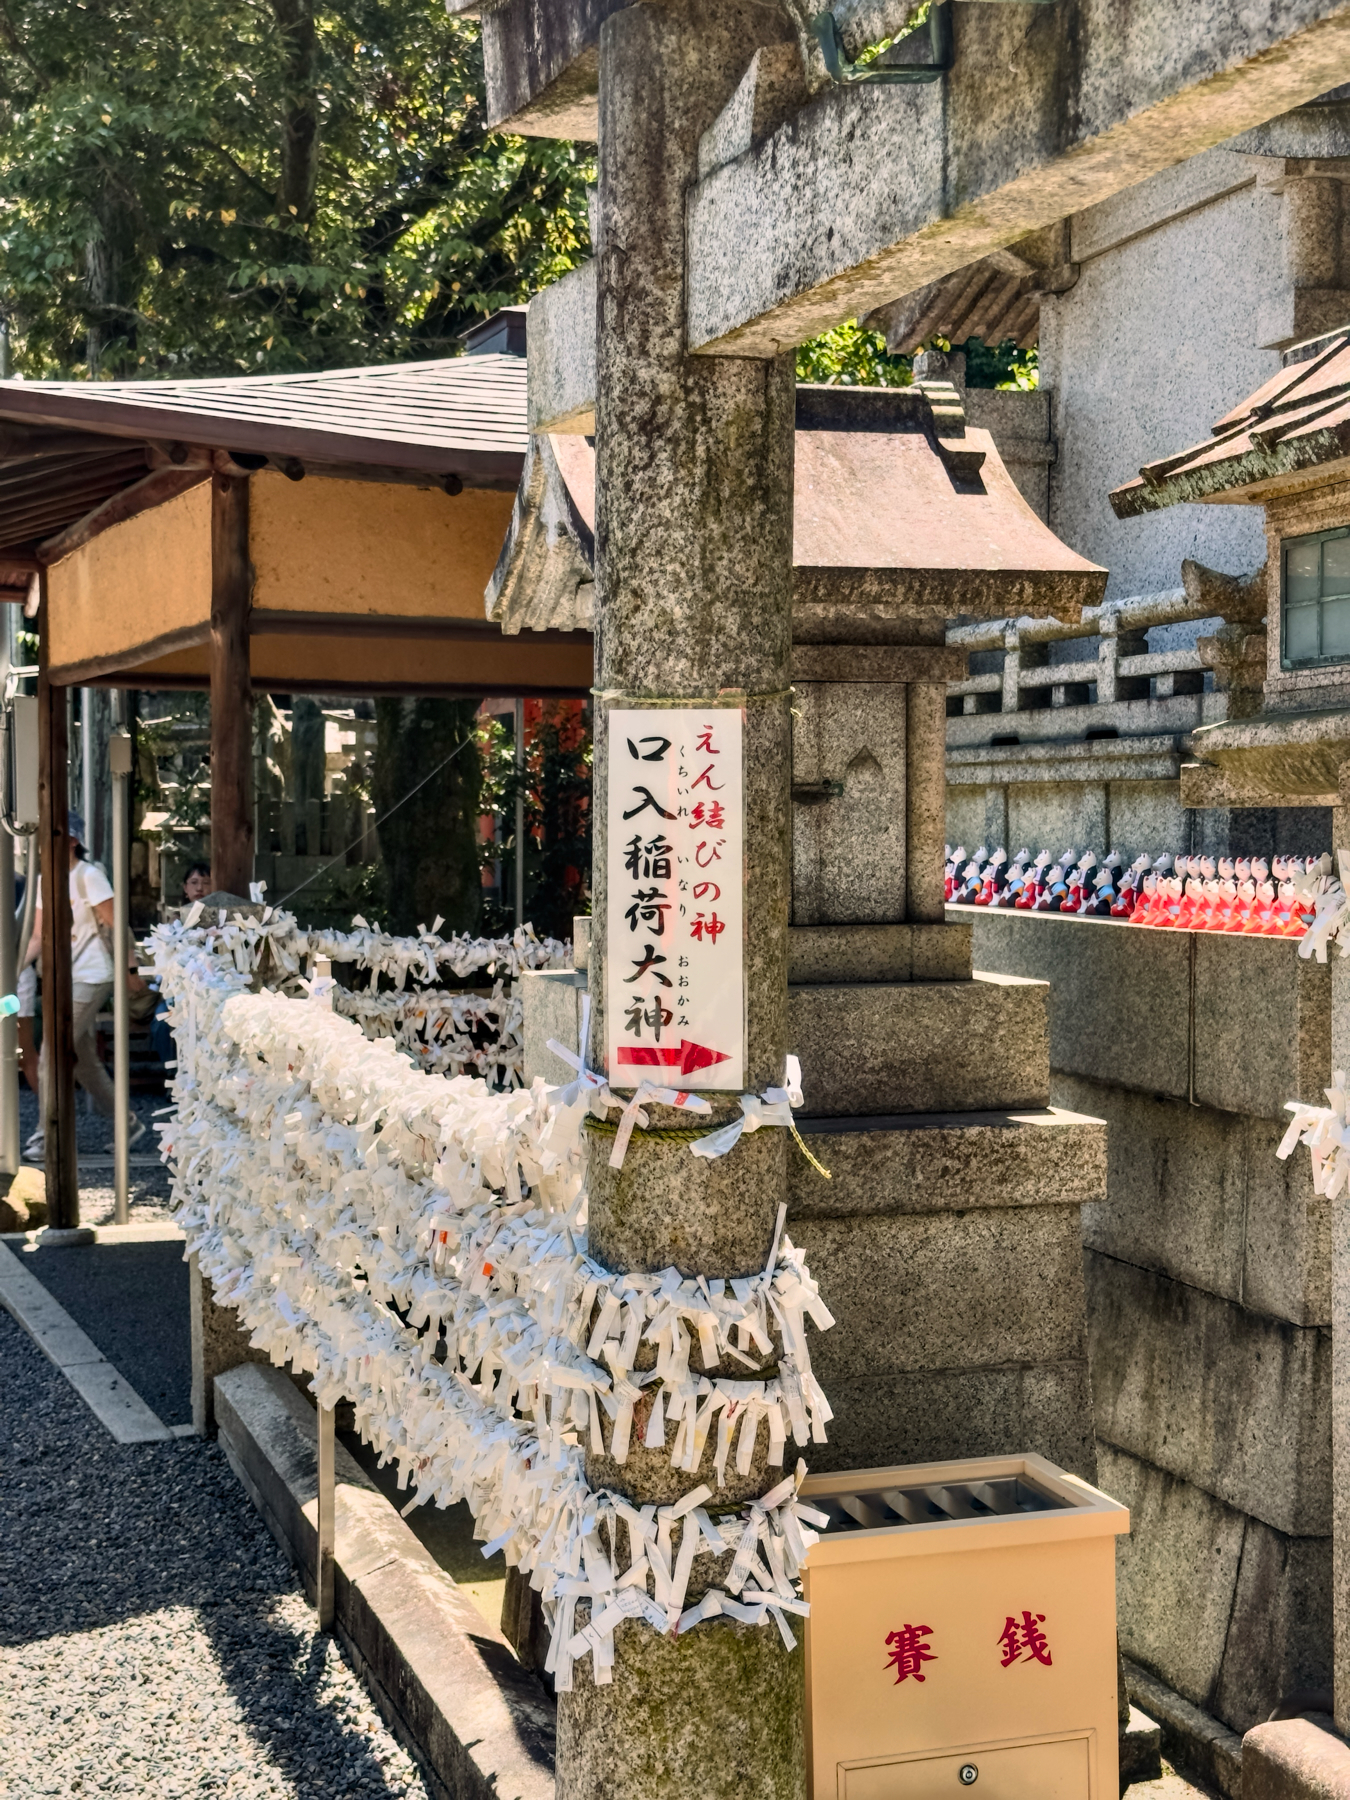 Torii gate and omikuji (fortune-telling paper strips) tied to a rope at a Shinto shrine in Japan, with a donation box in the foreground and a glimpse of shrine structures in the background.